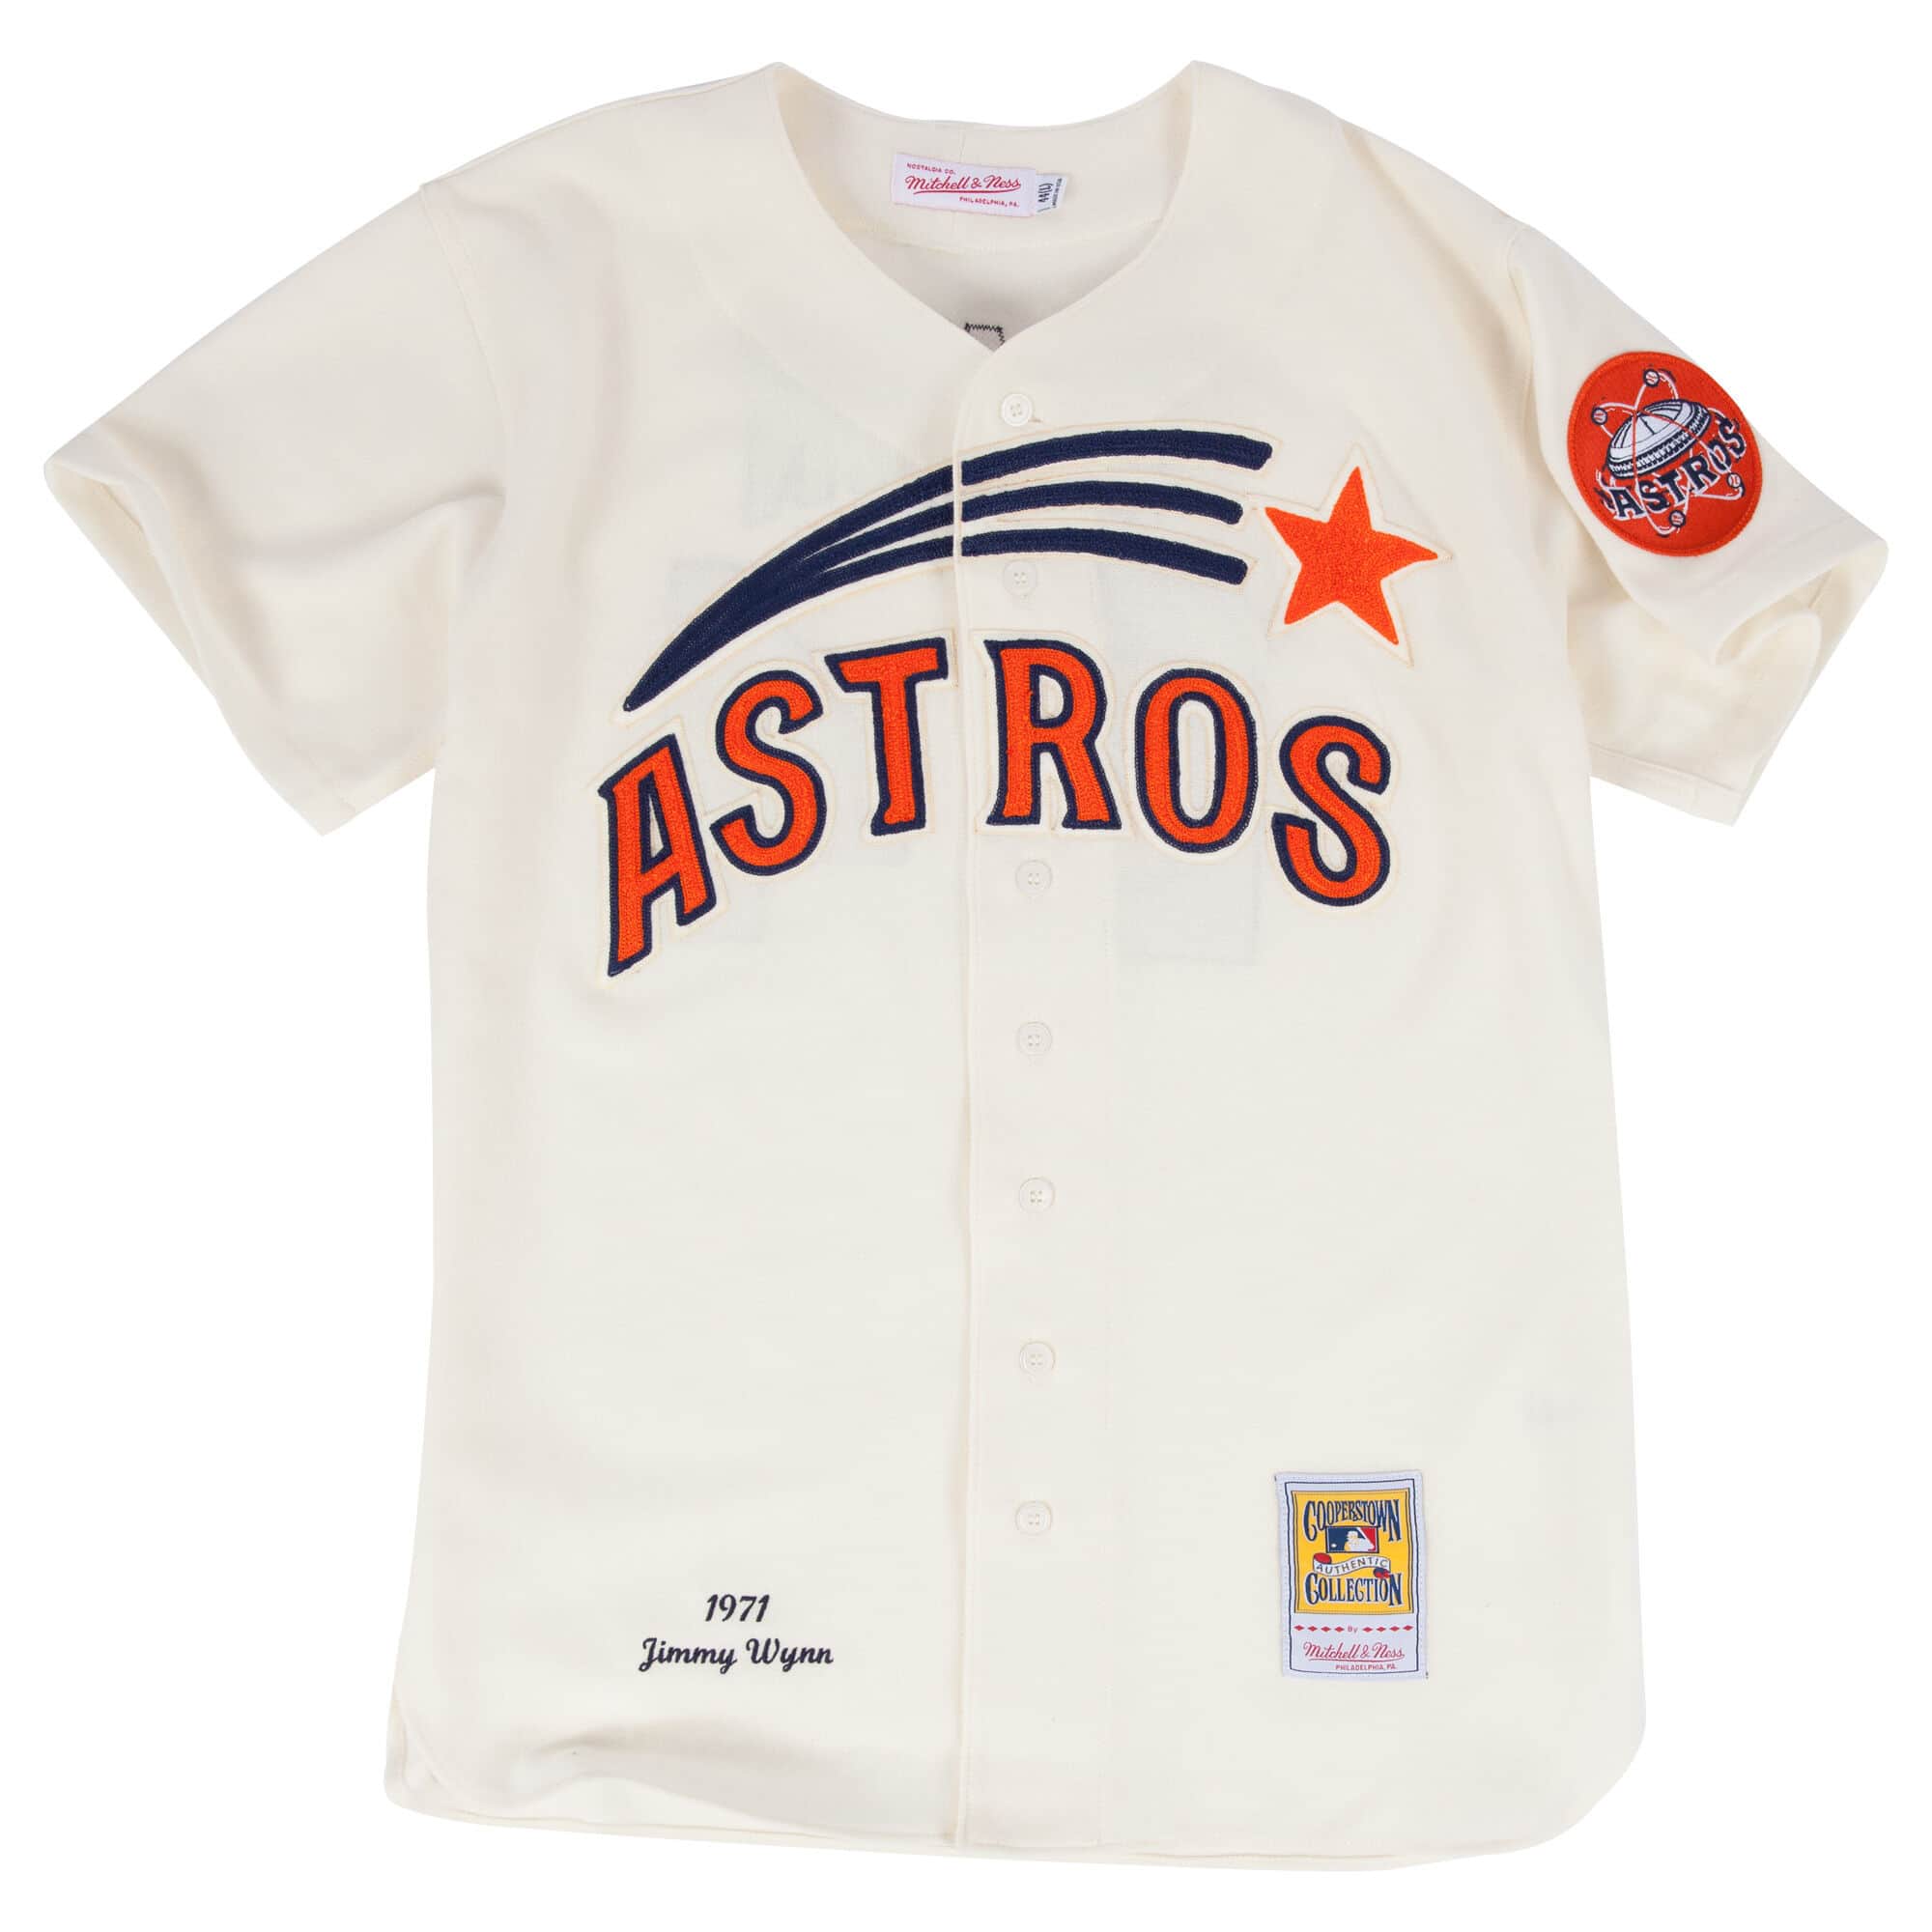 Mitchell & Ness on X: 3x @MLB All Star 291 Career Home Runs #2⃣4⃣ Retired  by @astros @Beyonce approved ✓ #HBD to the Toy Cannon @astros legend  Jimmy Wynn 🎂 